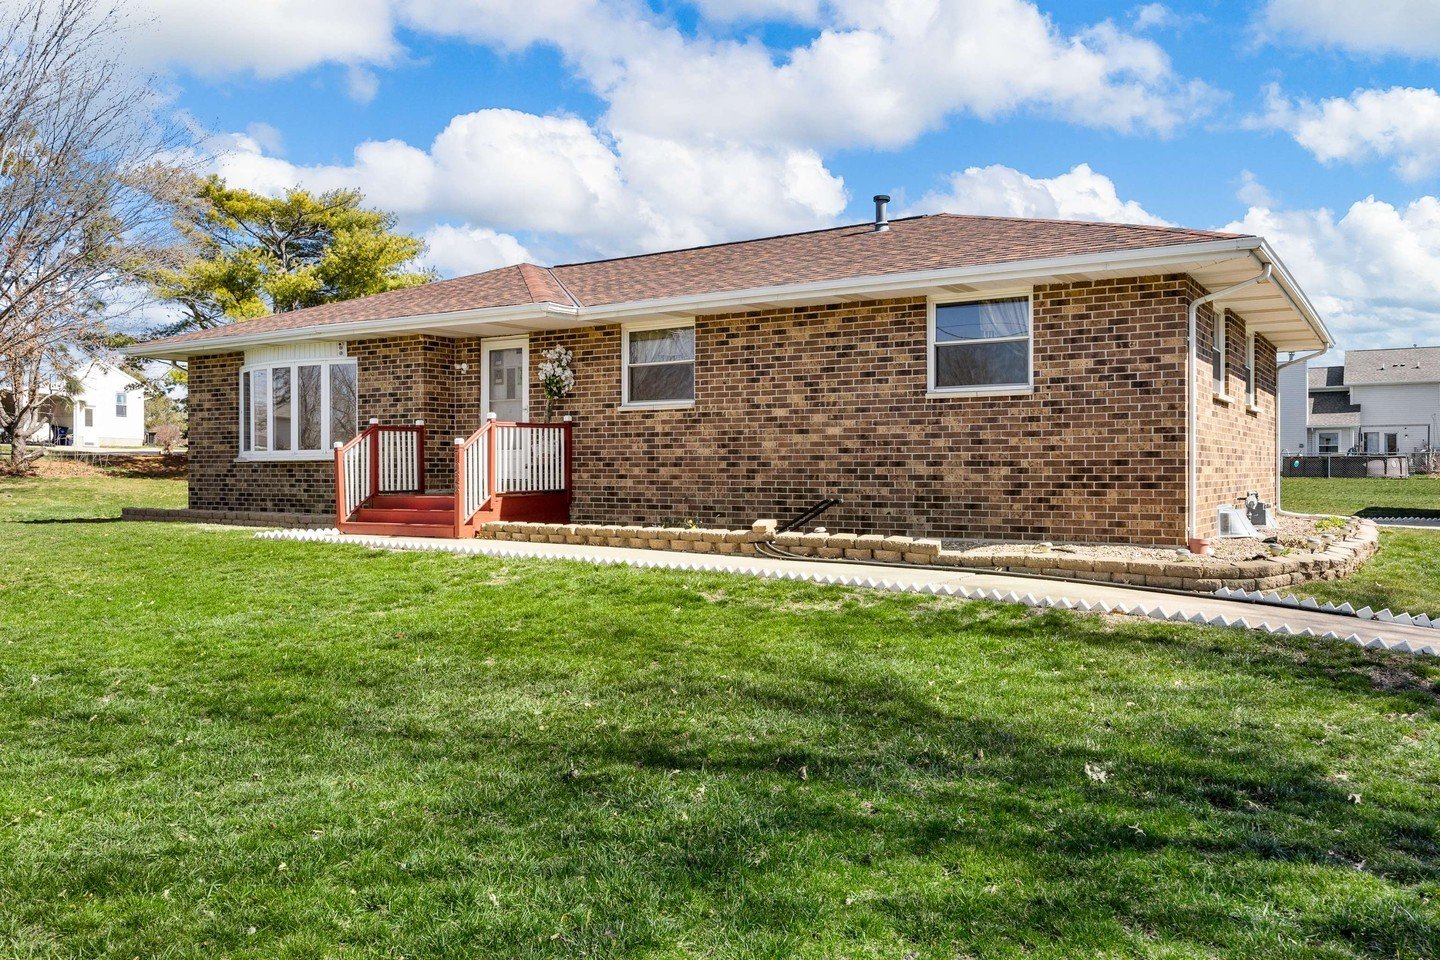 FOR SALE in Cedar Rapids, Iowa! 🏠
🗓️ 4-26-2024
📫 Located at 7026 Council St, Cedar Rapids
💰 $281,900
🛏️ 3 Bedrooms
🛁 2 Baths
🚗 3.5 Stall Garage
🗺 A distinguished all-brick ranch nestled on a nearly one-acre lot
✨The property features a large 